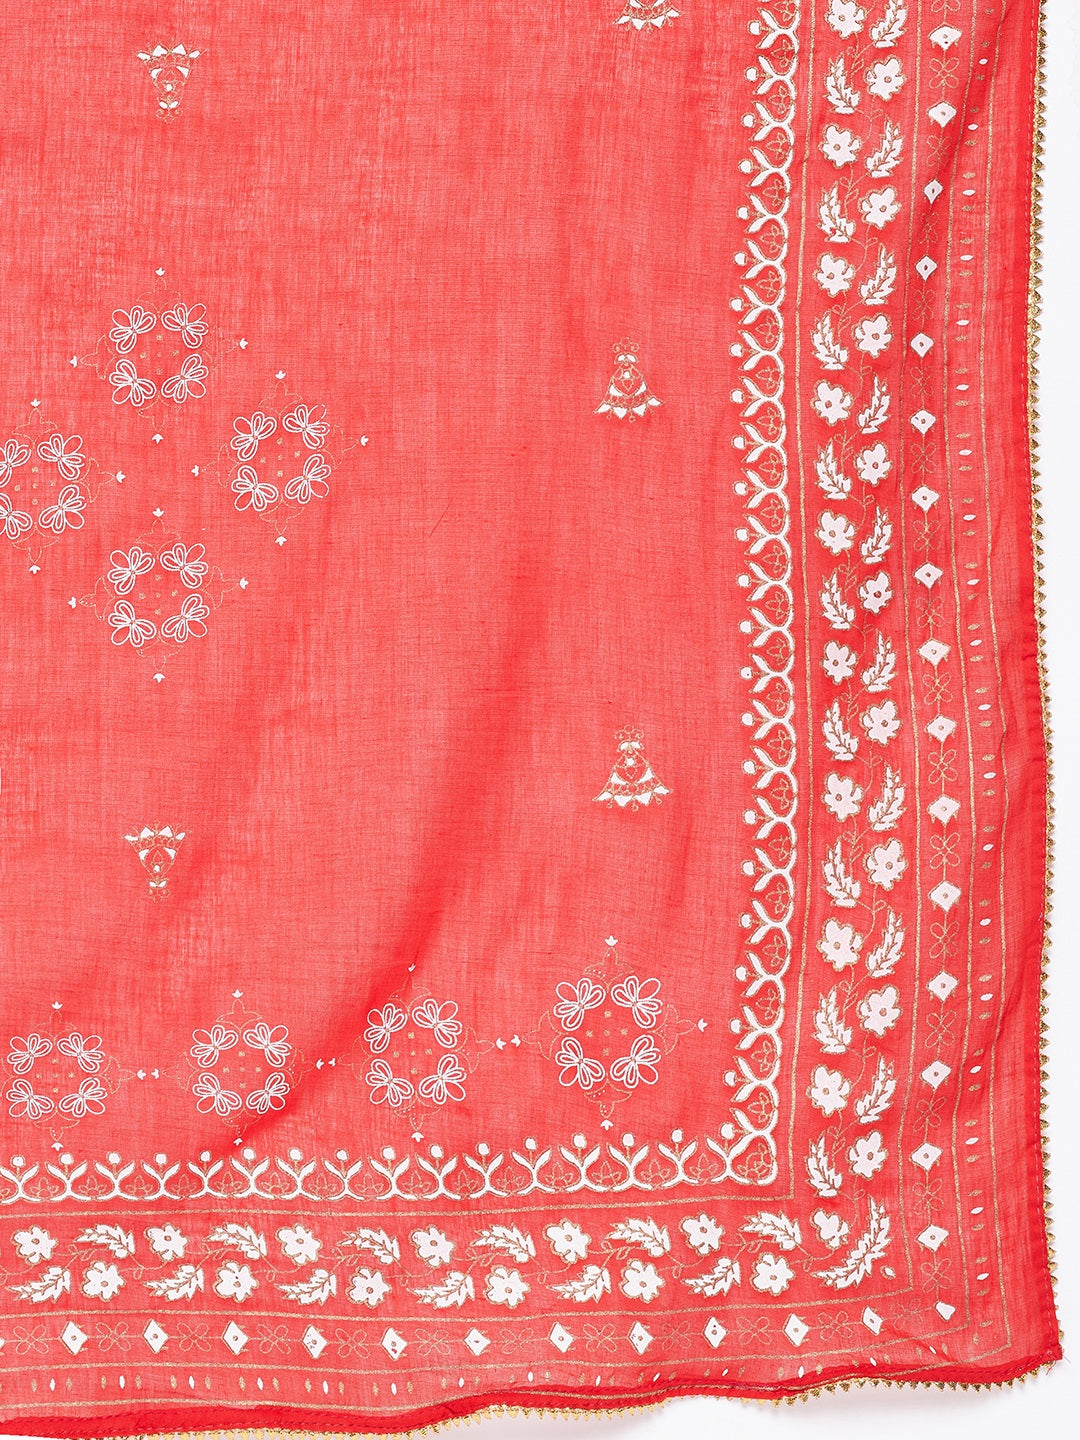 Women Red Ethnic Motifs Printed Kurta with Trousers With Dupatta